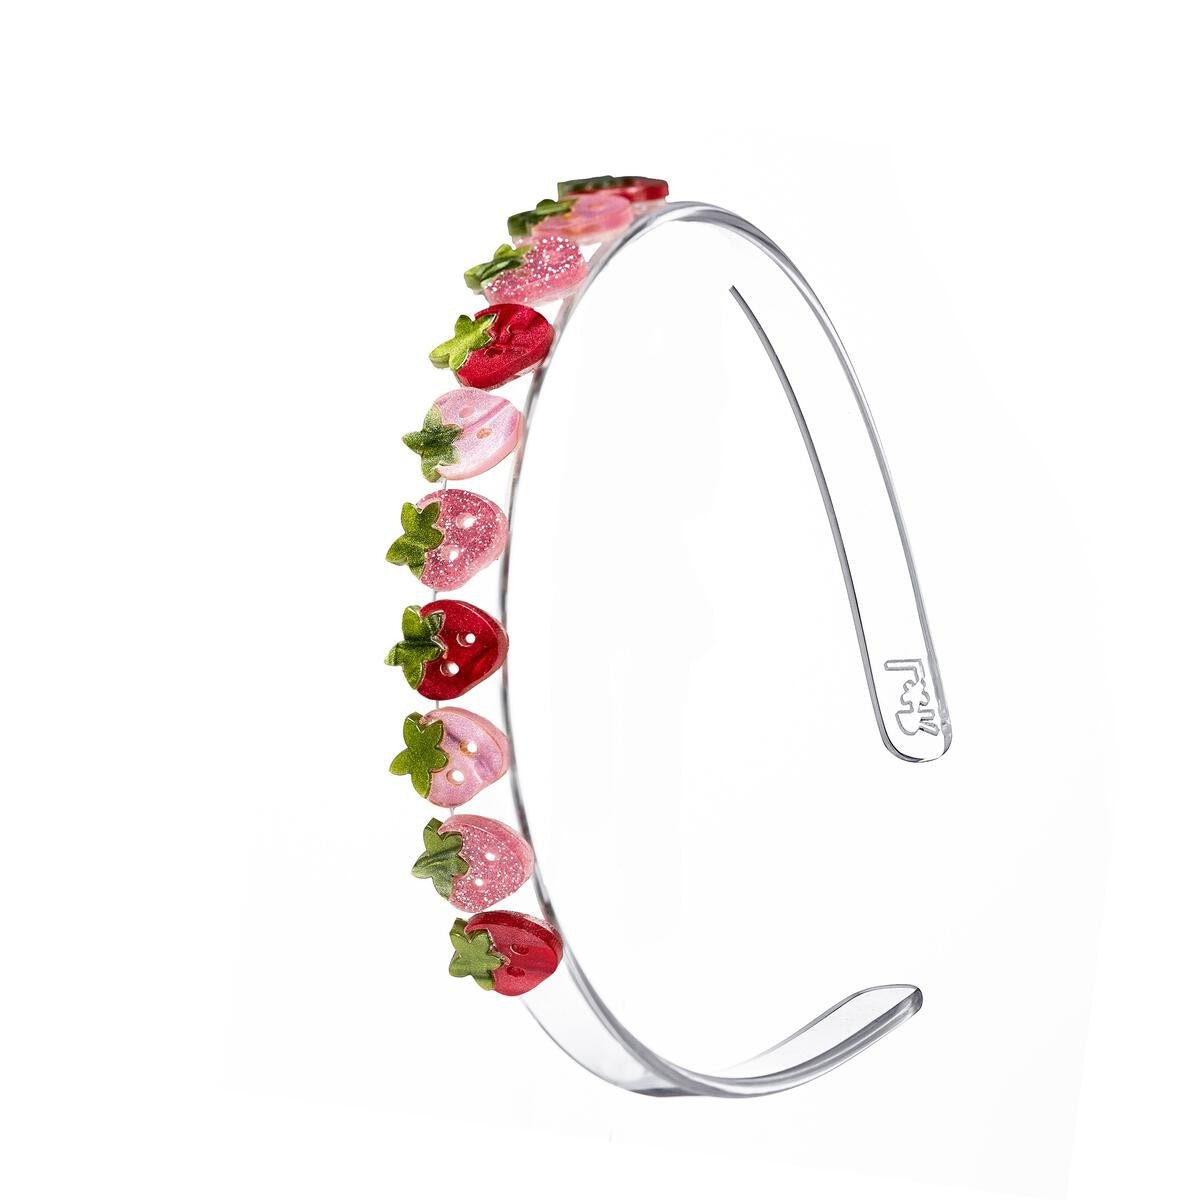 PEARLIZED STRAWBERRY HEADBAND - LILIES & ROSES